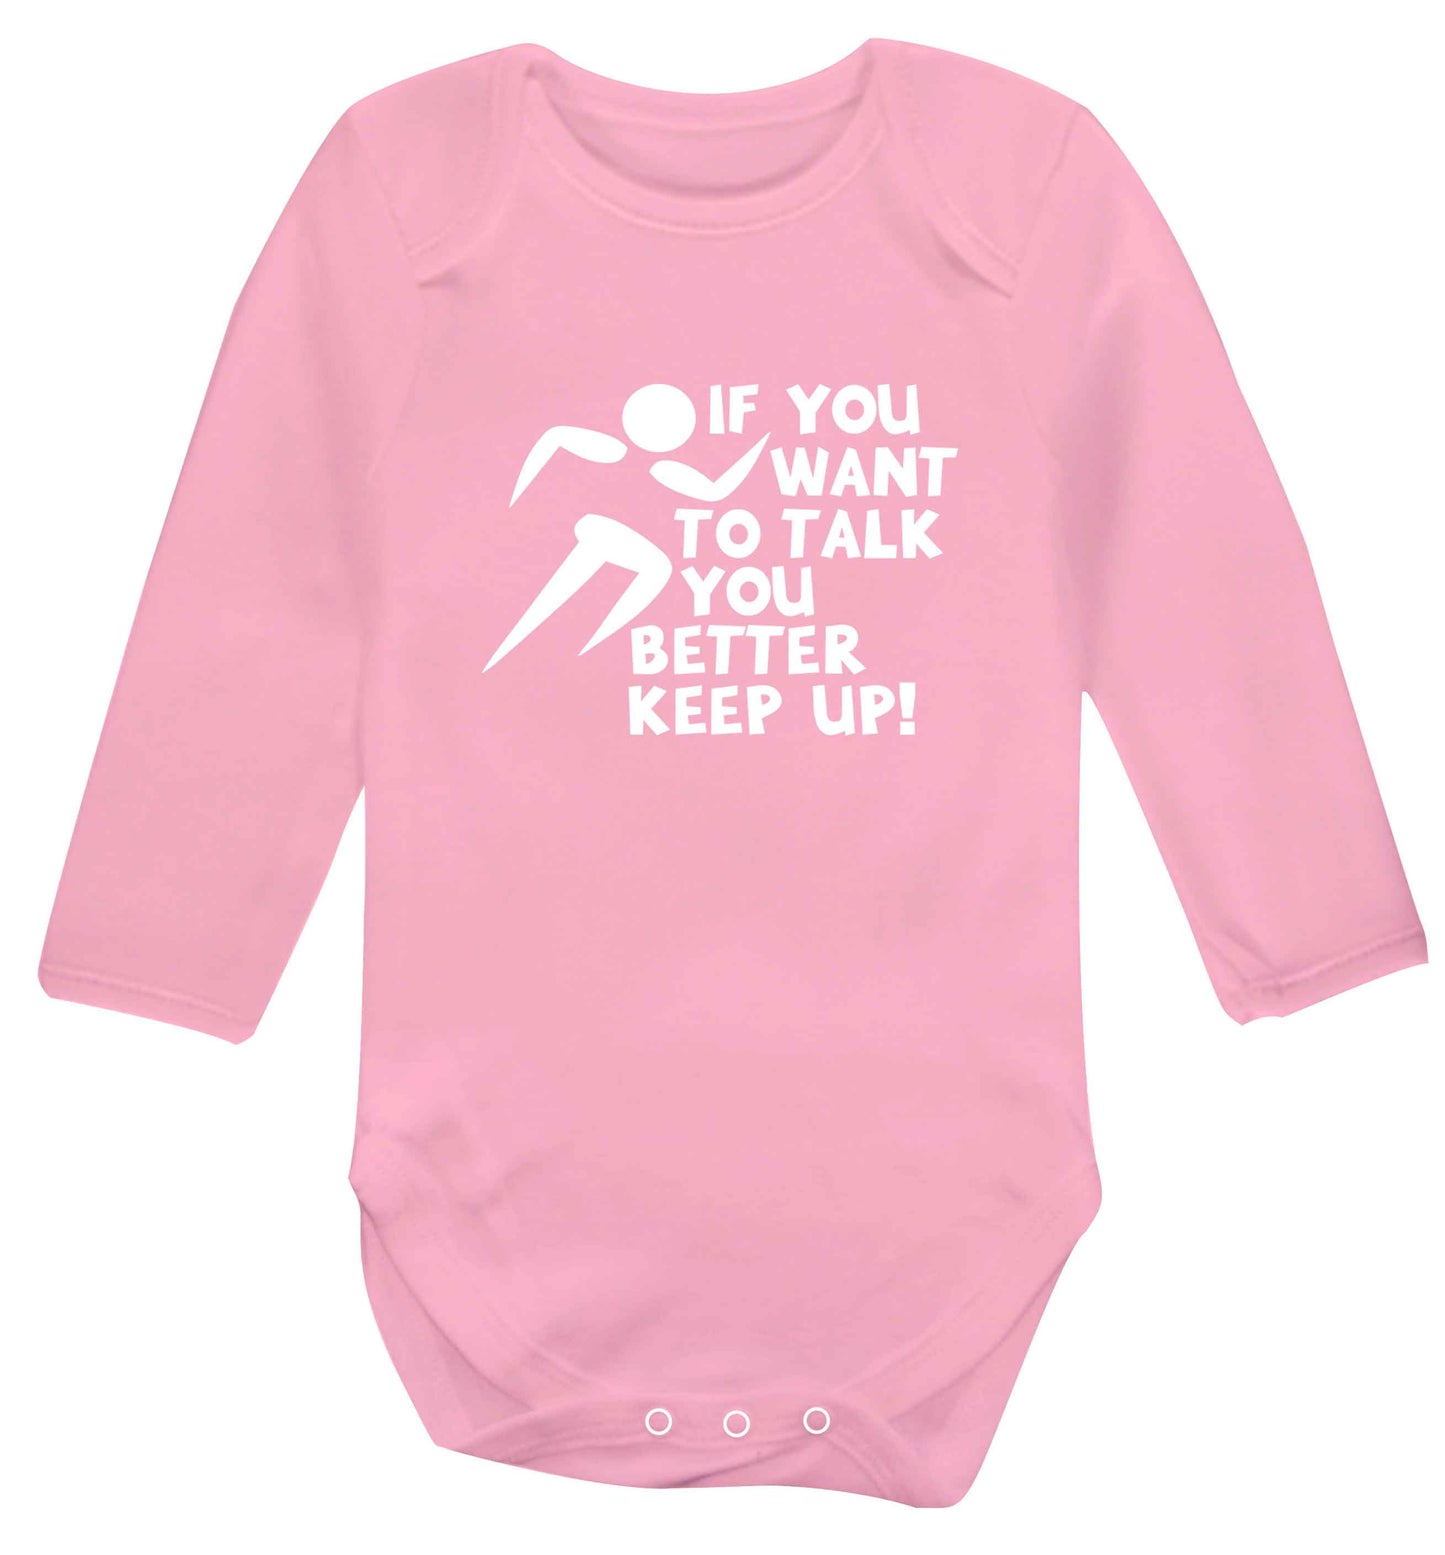 If you want to talk you better keep up! baby vest long sleeved pale pink 6-12 months